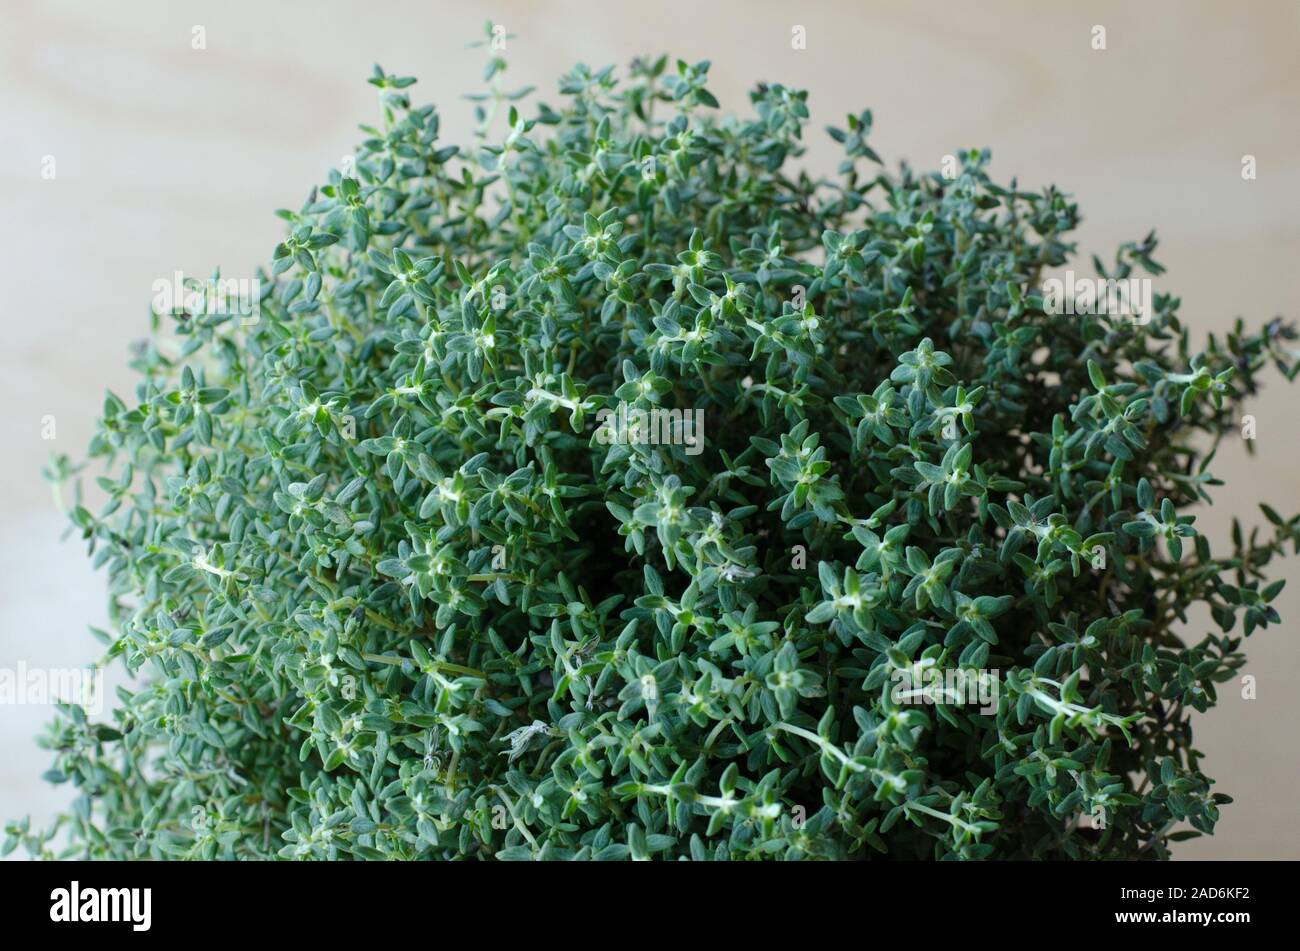 Thyme plant in closeup Stock Photo